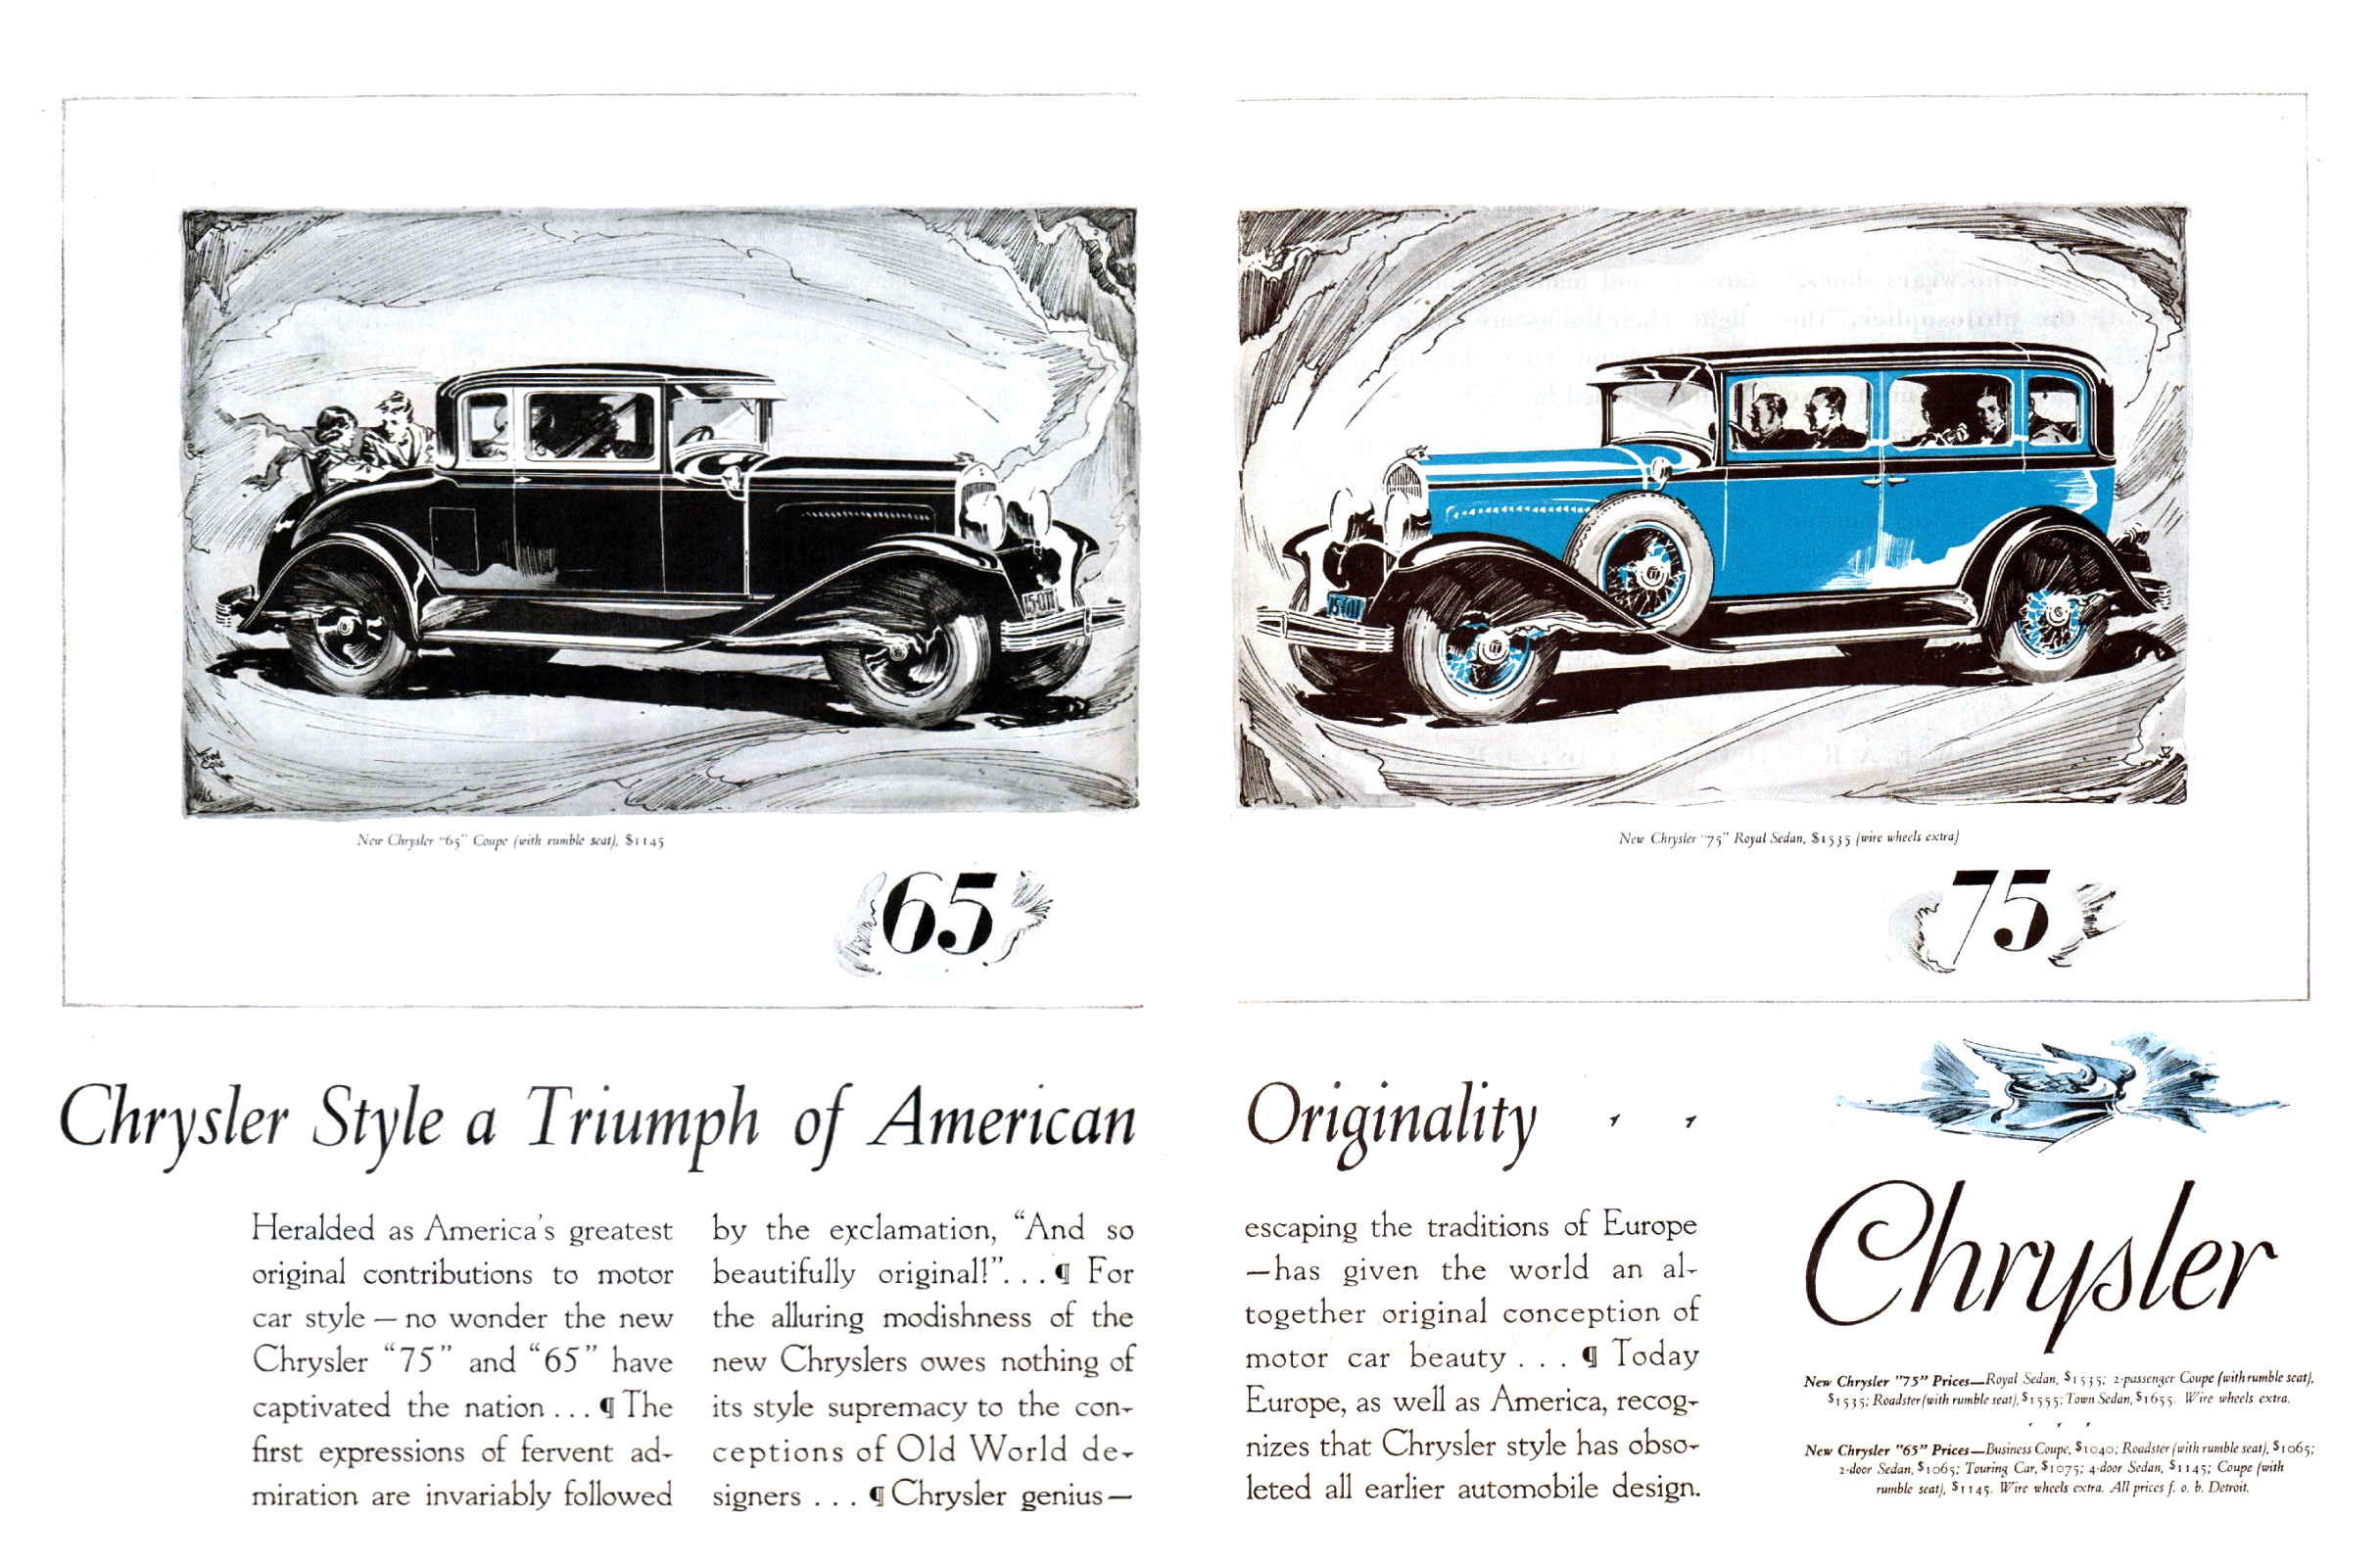 Chrysler "65" Coupe and "75" Royal Sedan Ad (September, 1928) - Illustrated by Fred Cole